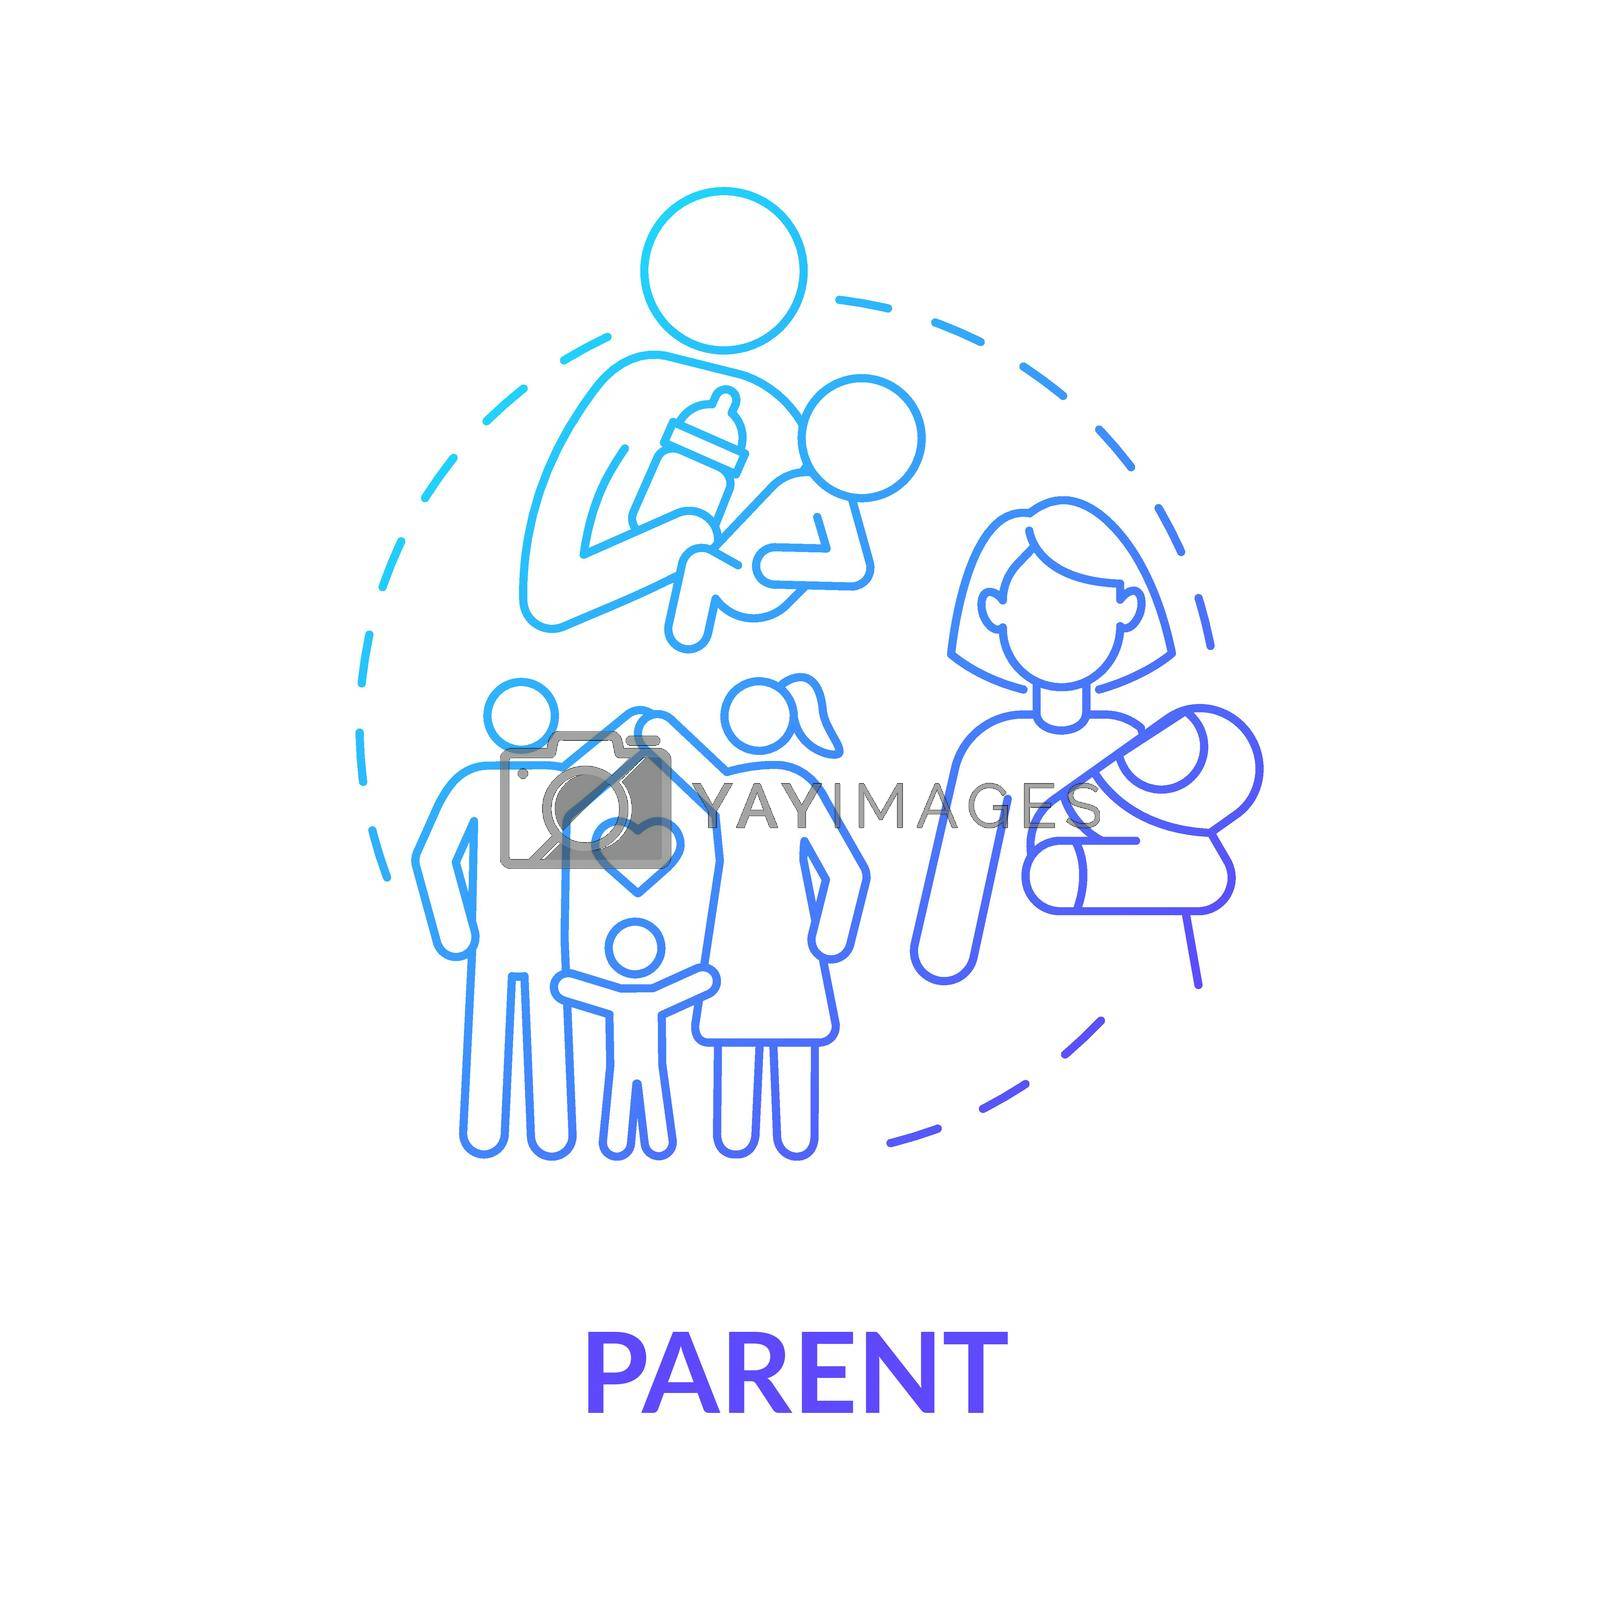 Royalty free image of Parent position in society blue gradient concept icon by bsd